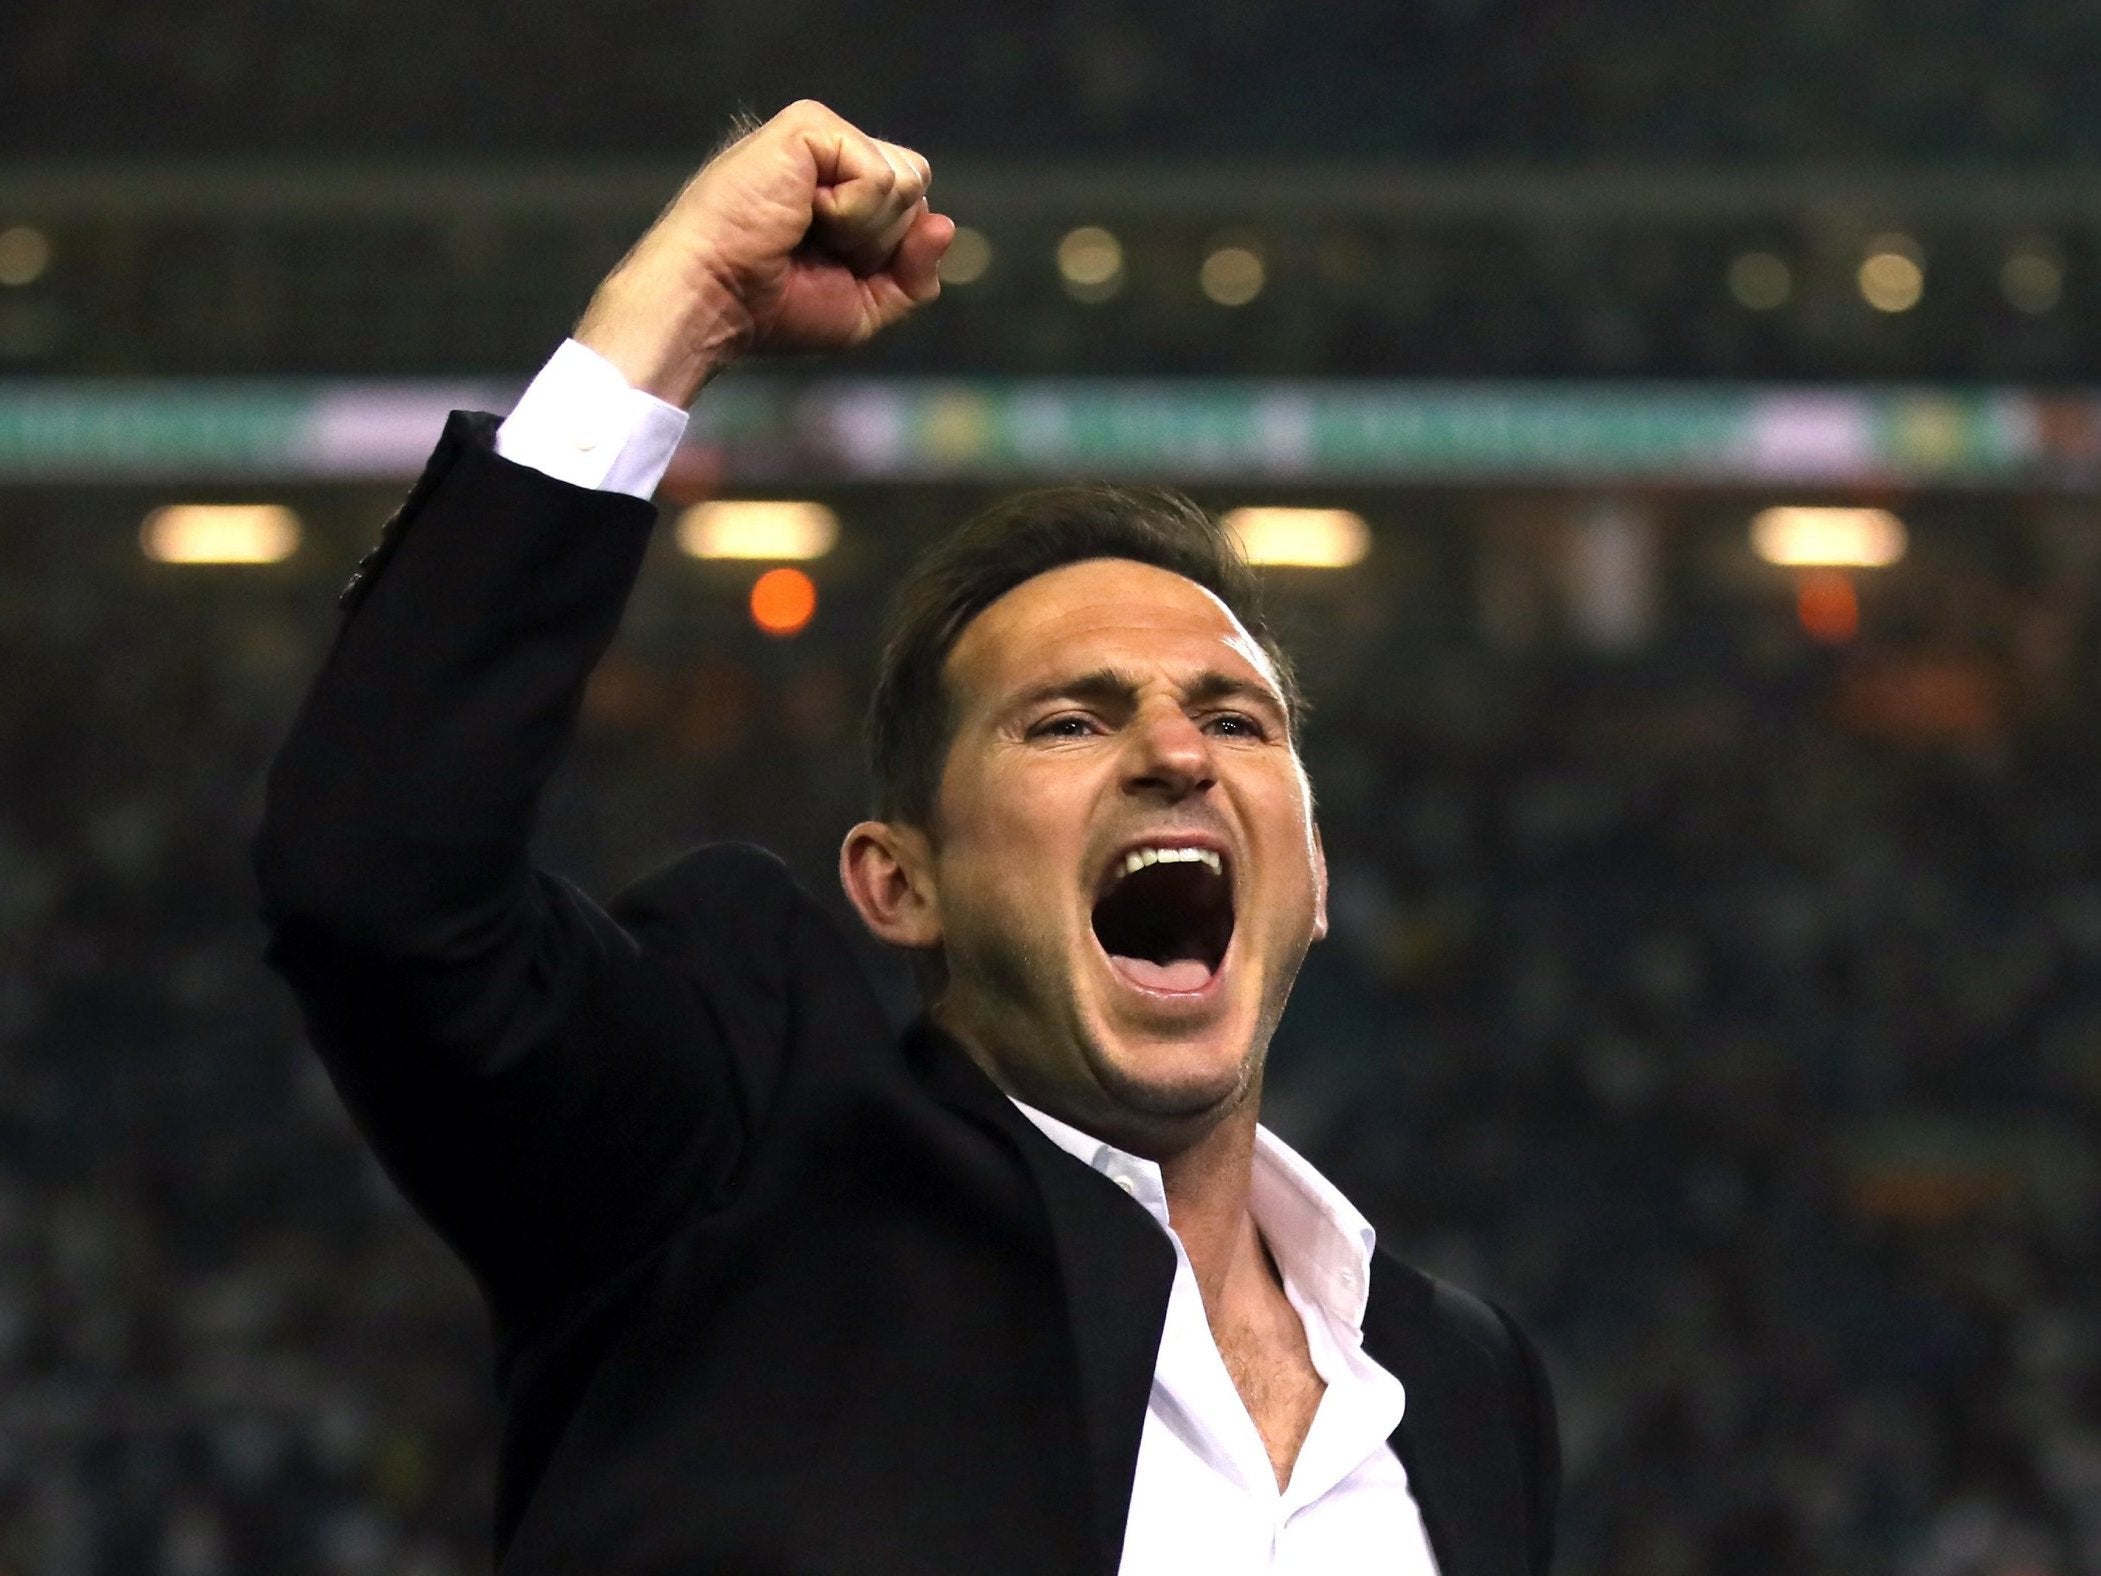 Frank Lampard celebrates Derby County's victory over Leeds United to reach the Championship play-off final